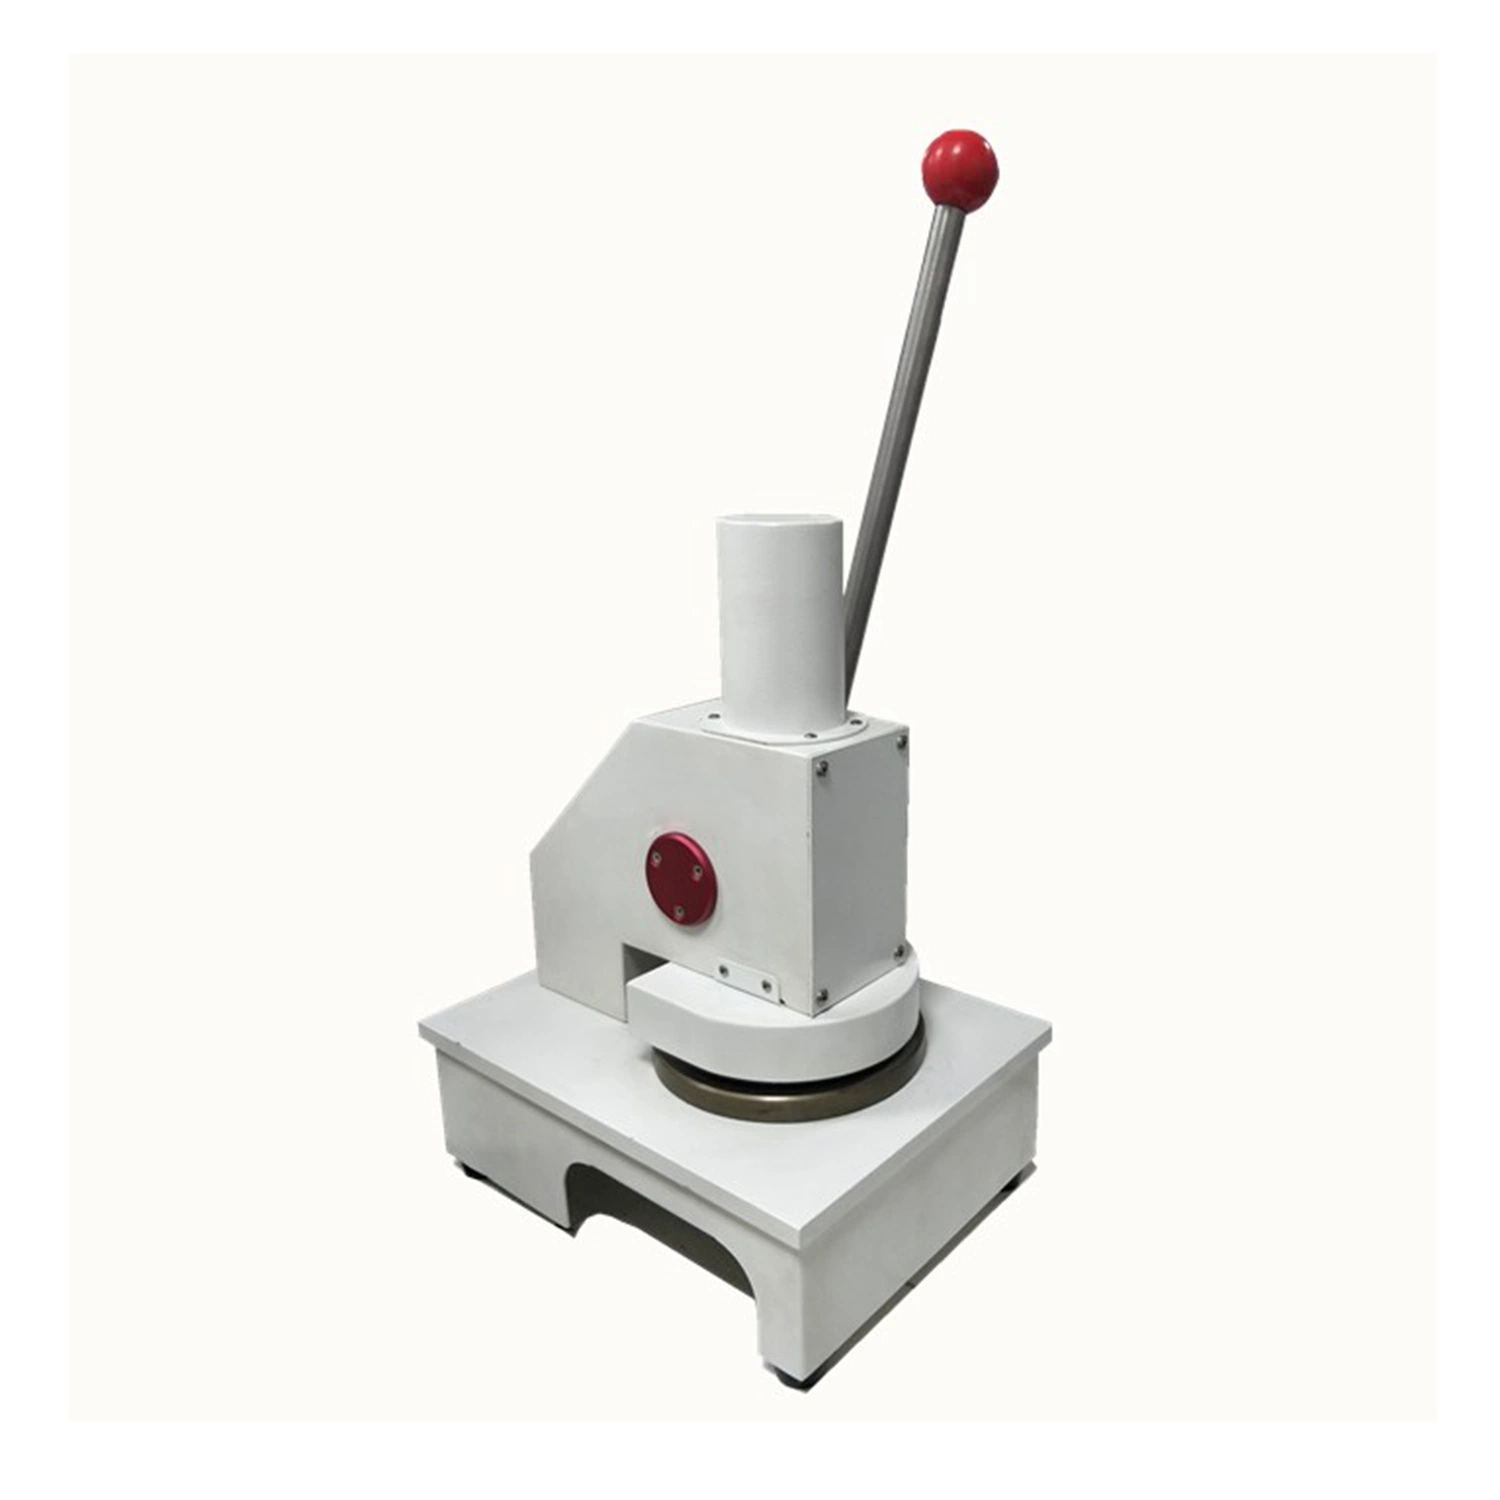 Xd-A24 Cobb Cobb Sample Cutter Laboratory Testing Instrument for Paper and Paperboard